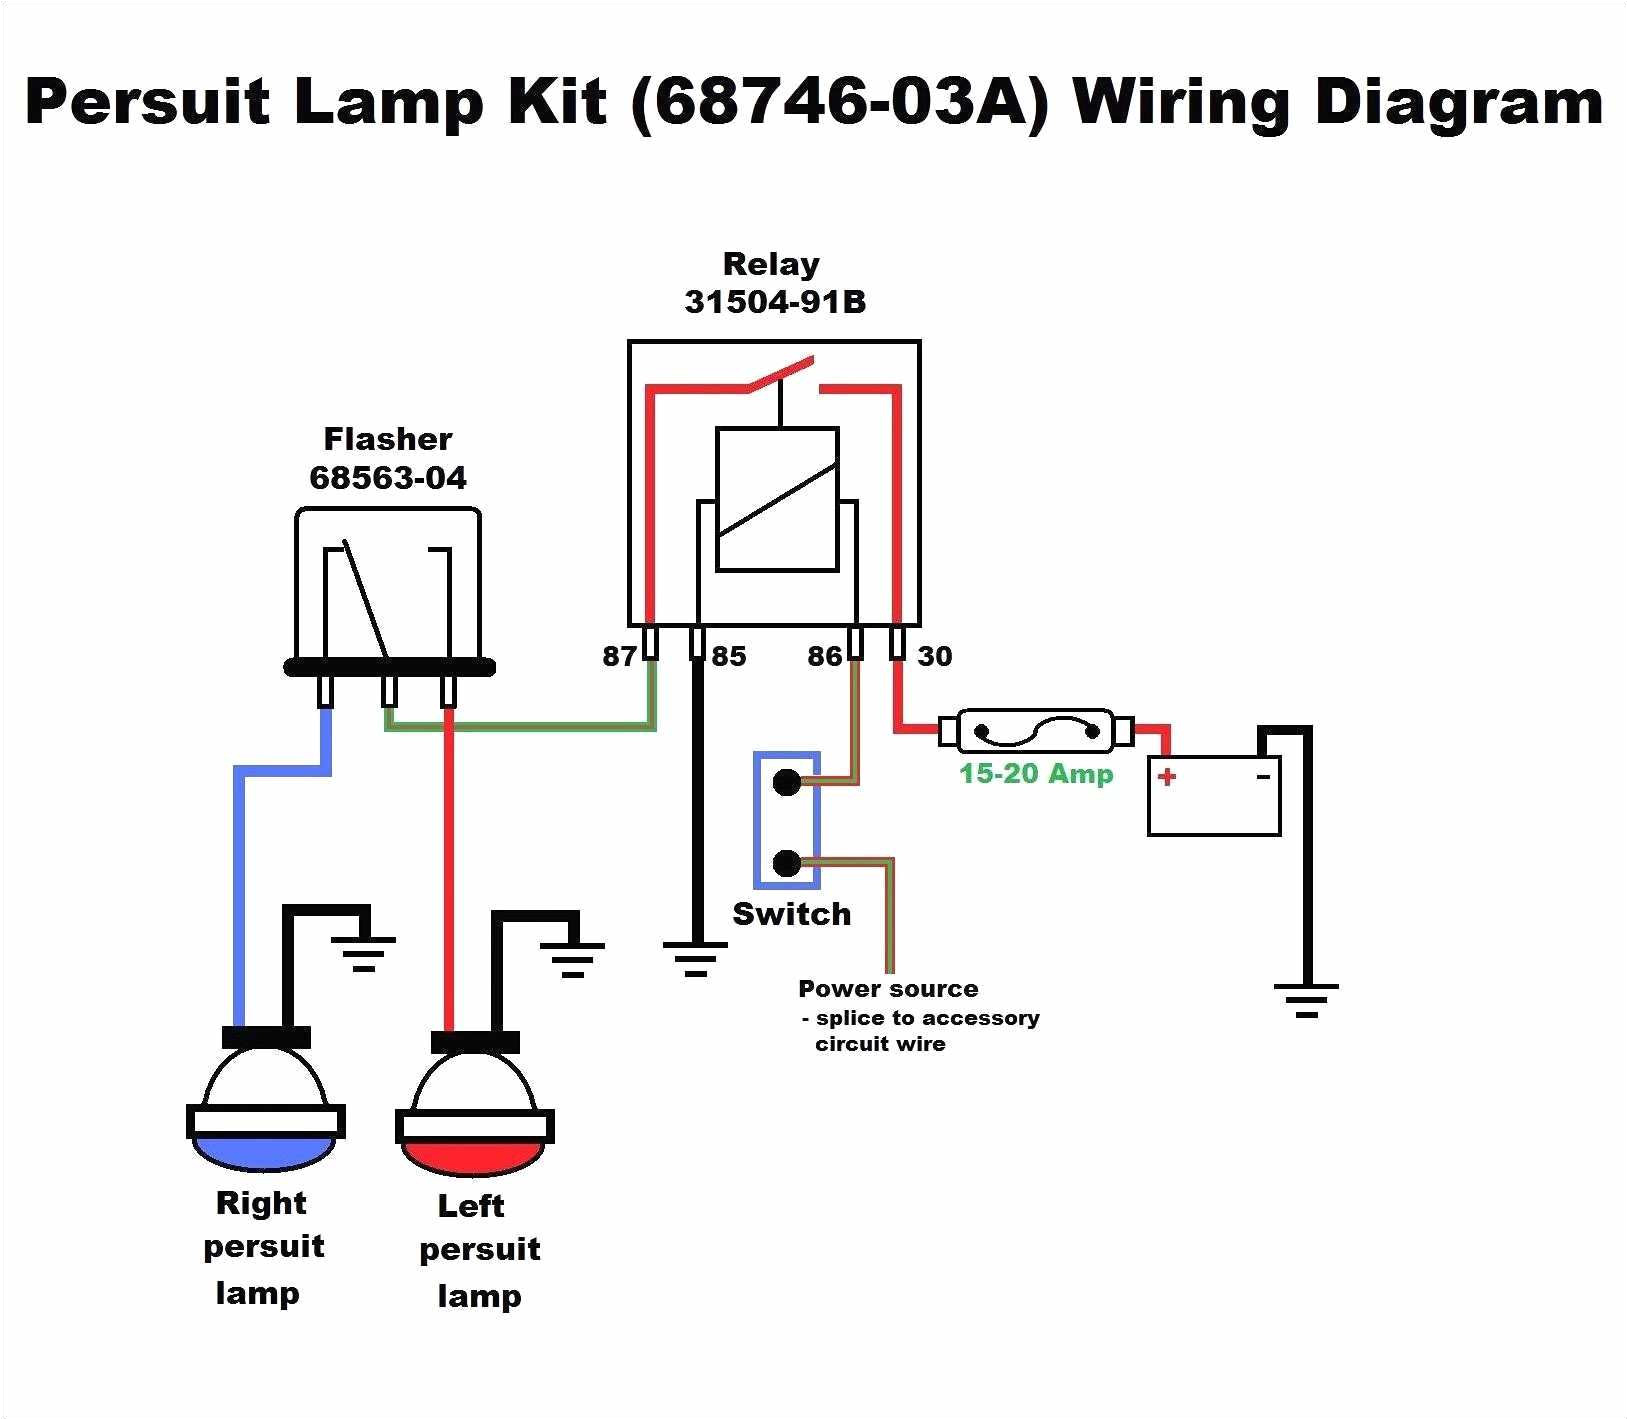 Parallel Circuit Wiring Diagram Basic Wiring Diagrams Best Of Parallel Circuit Information Awesome